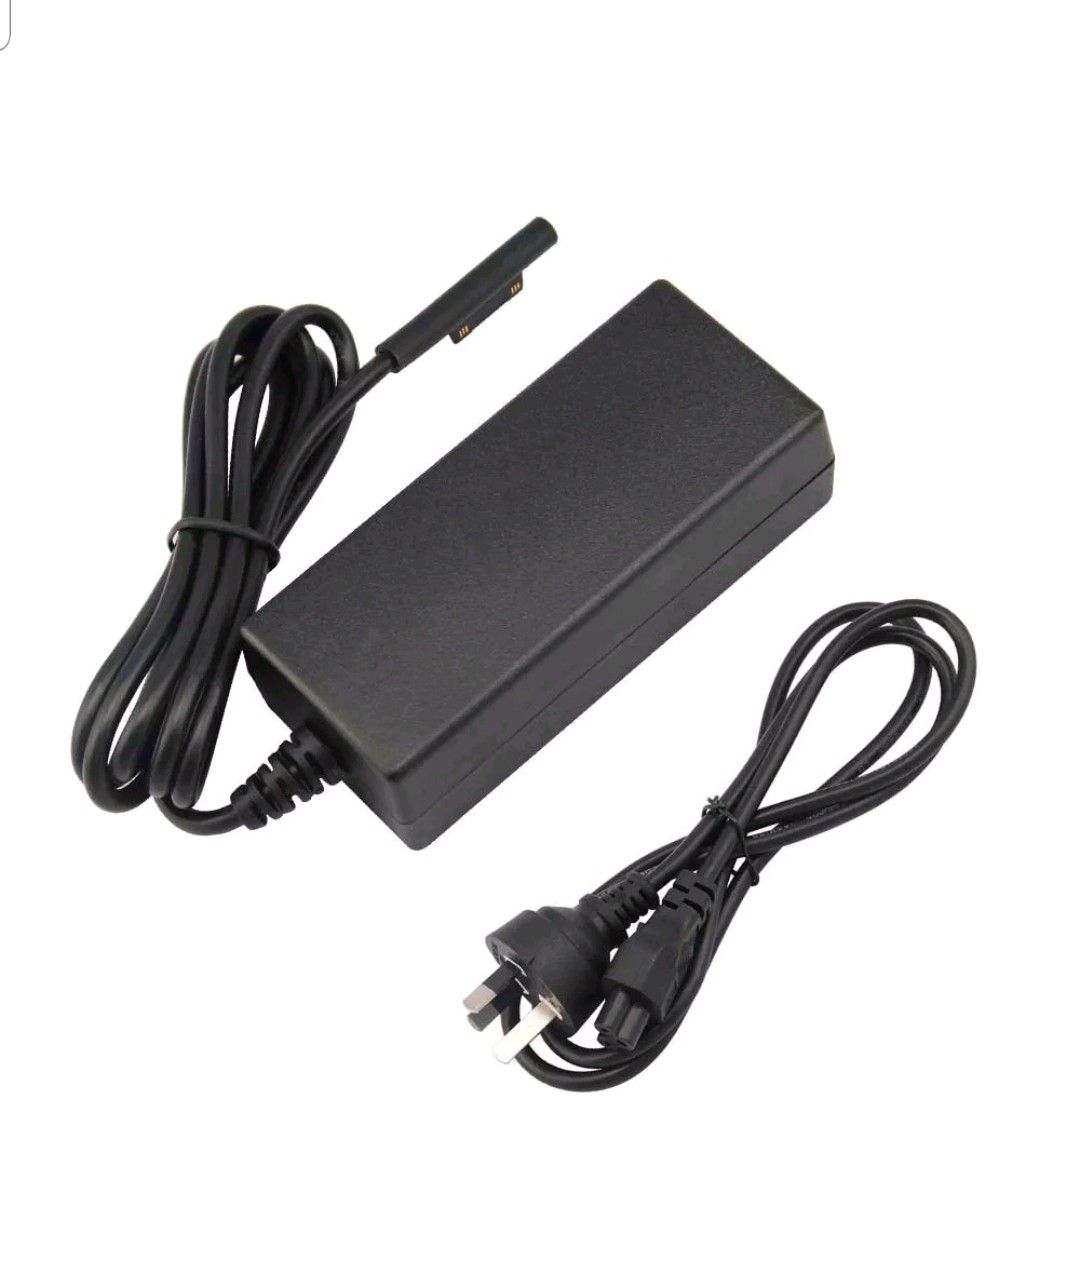 Power Replacement Adapter Power Supply For Microsoft Surface Pro 4, 3 Tablet Power Supply 1625 Adapter 12V 2.58A Charger